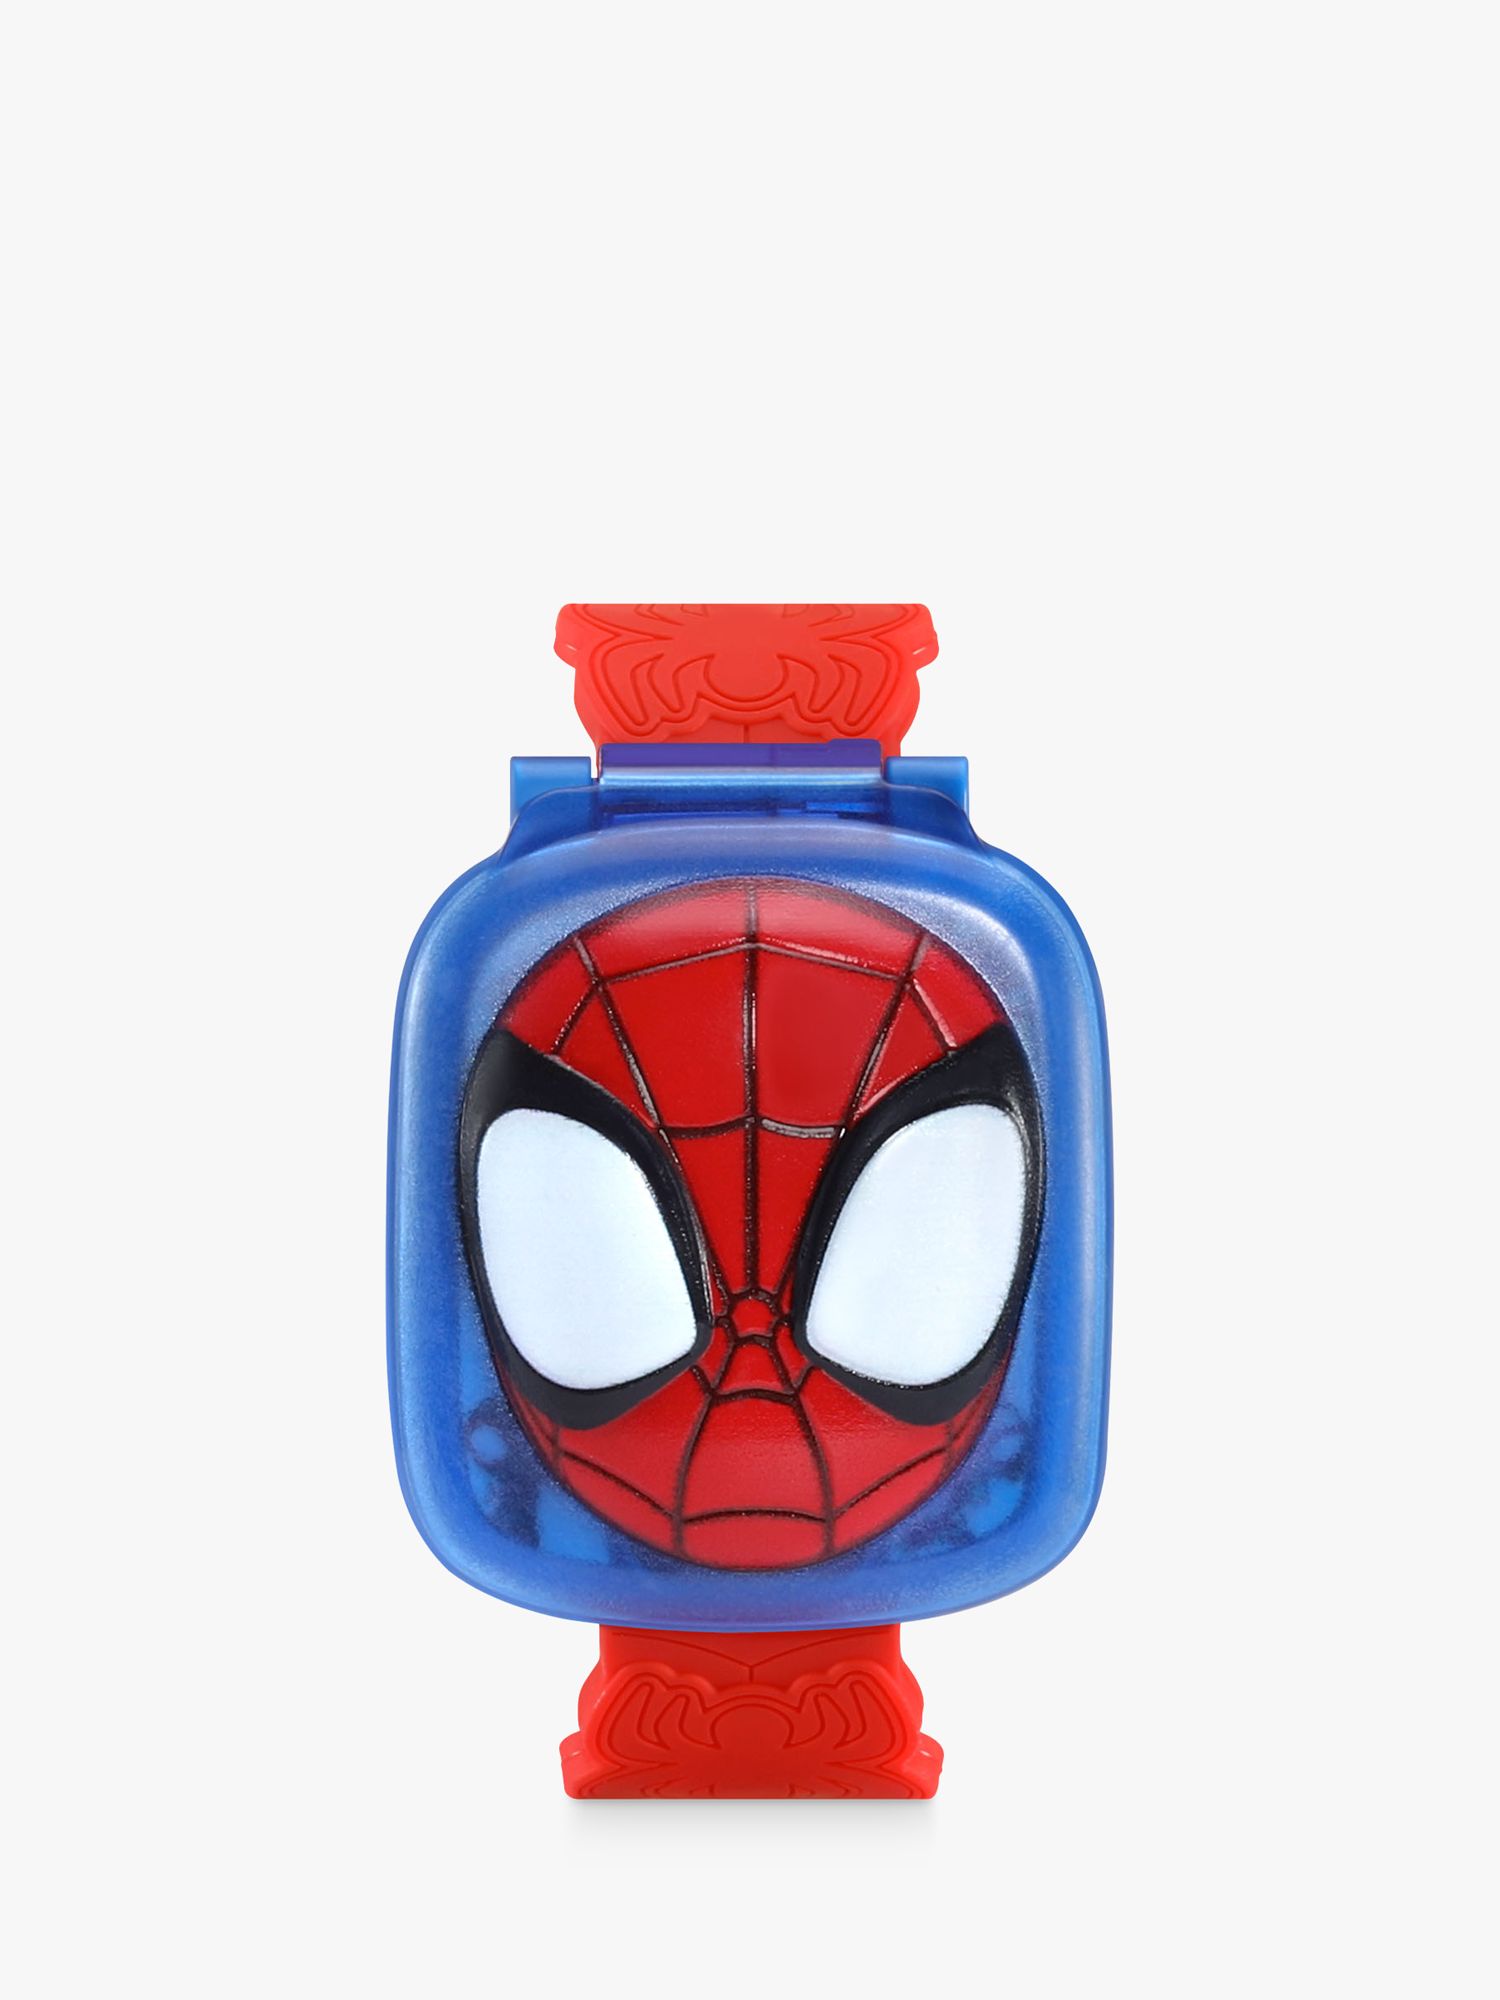 New Arrival Spider-Man Toys | John Lewis & Partners